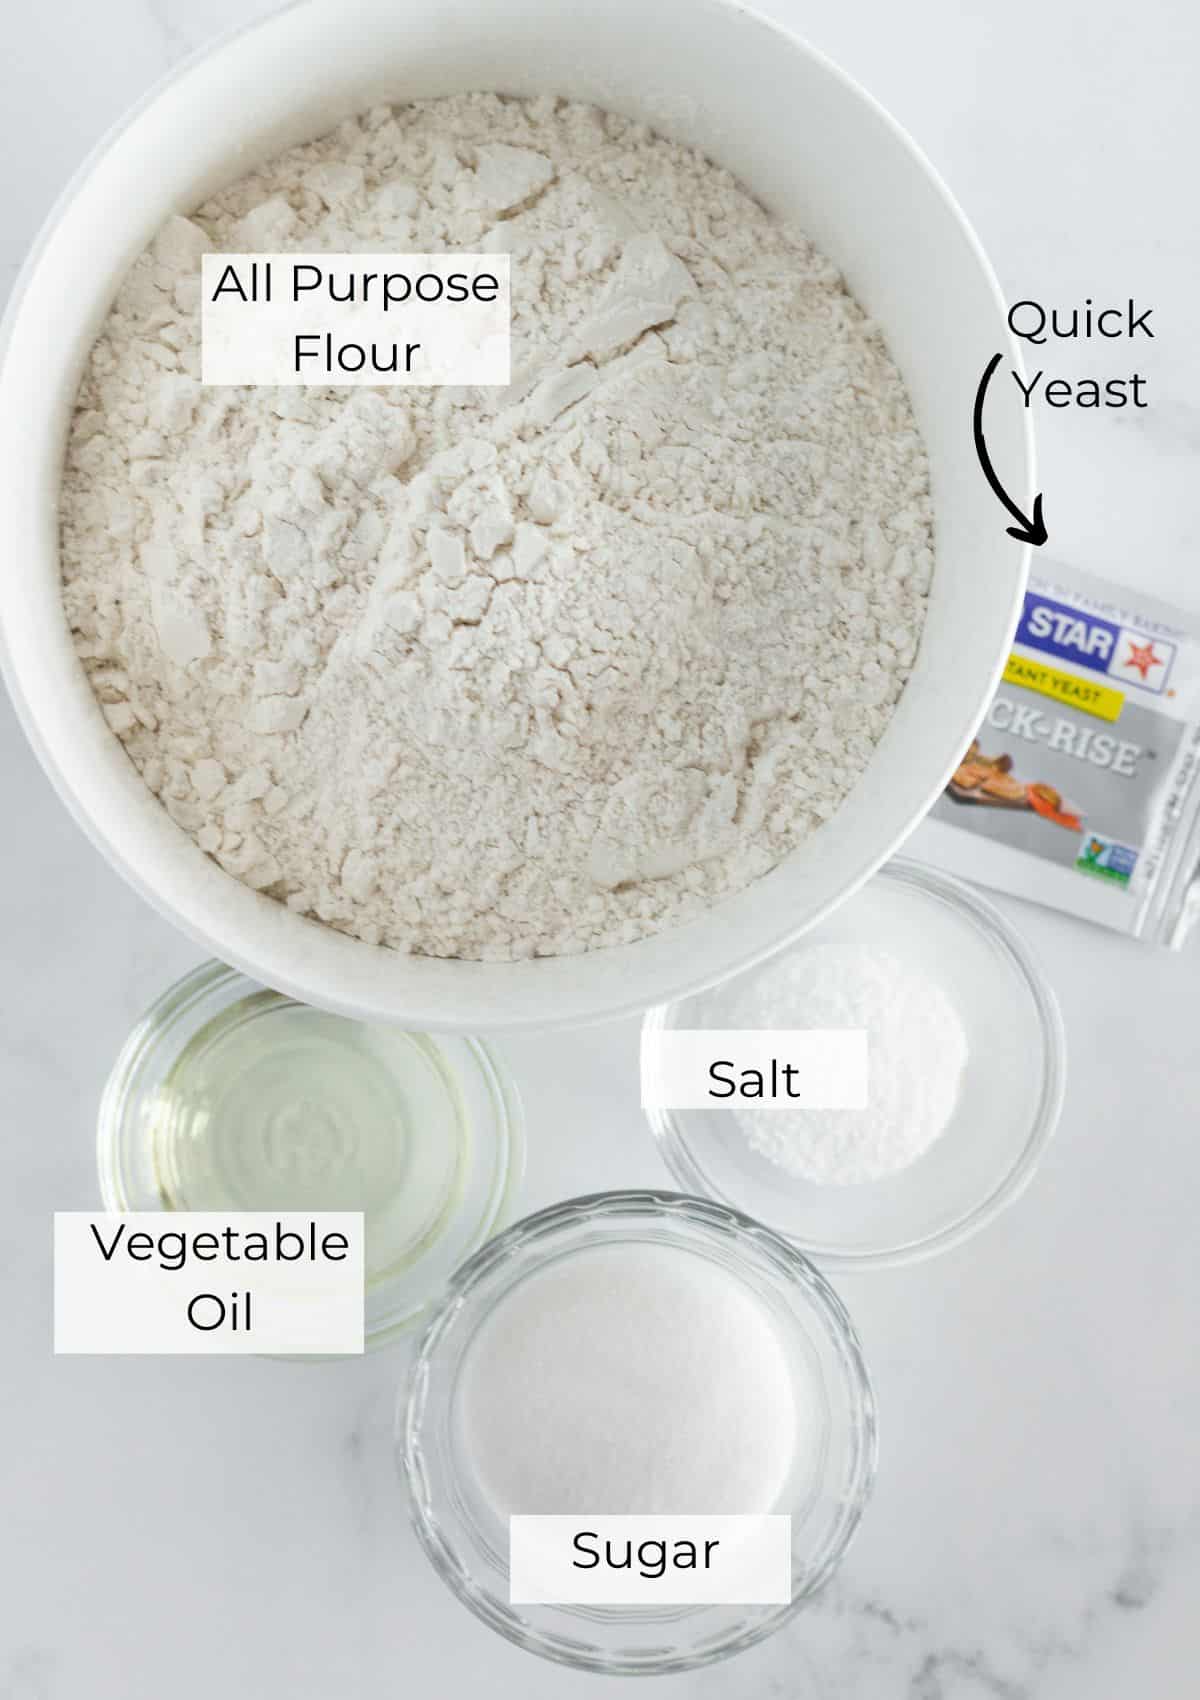 Ingredients needed to make One Hour Bread.